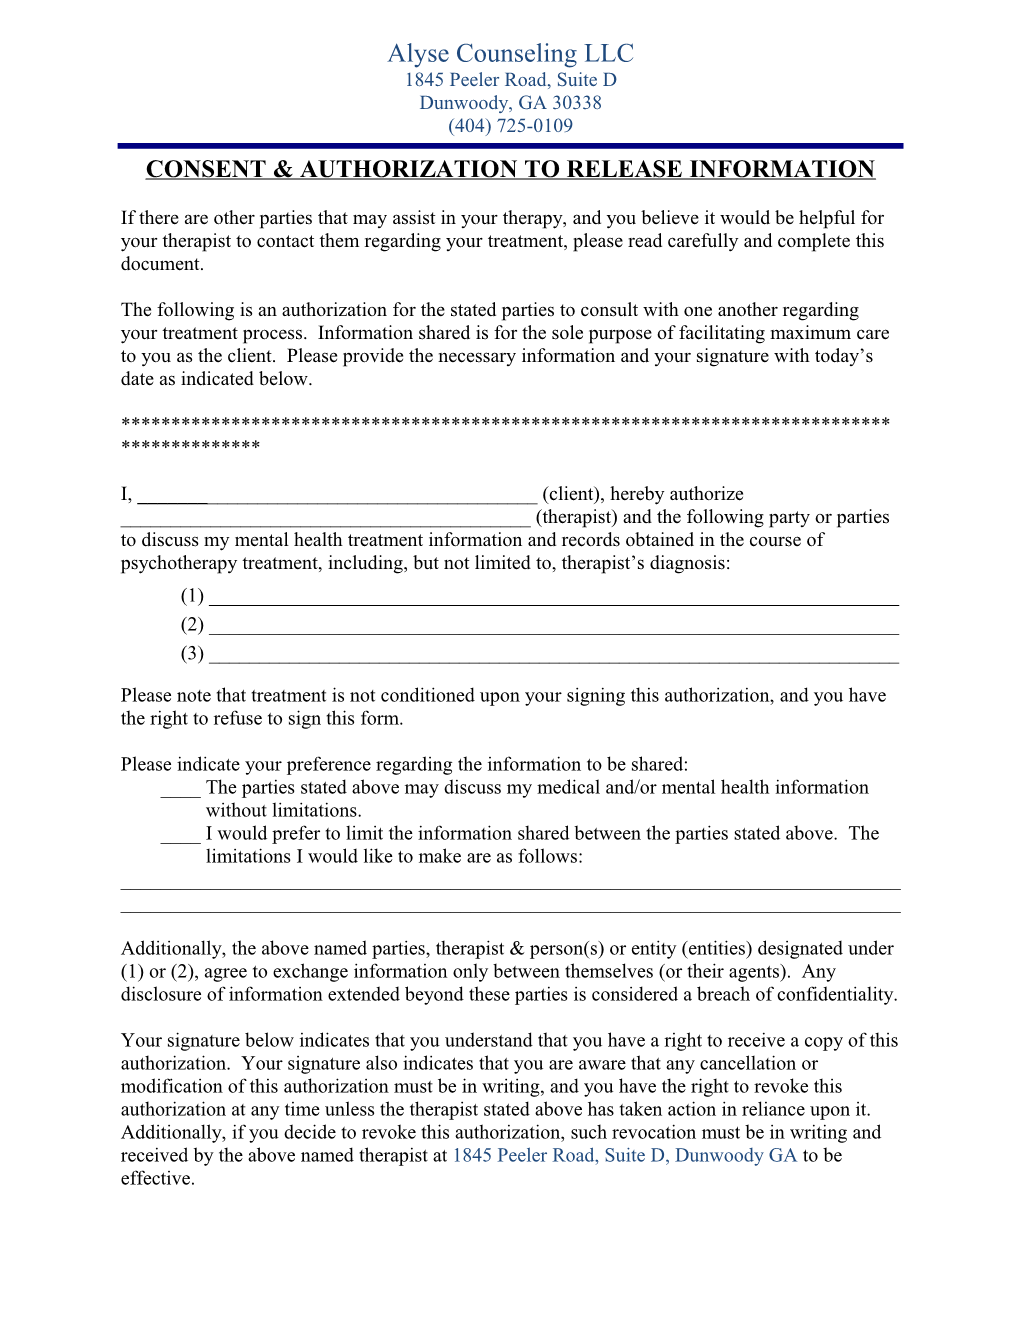 Release of Information Form